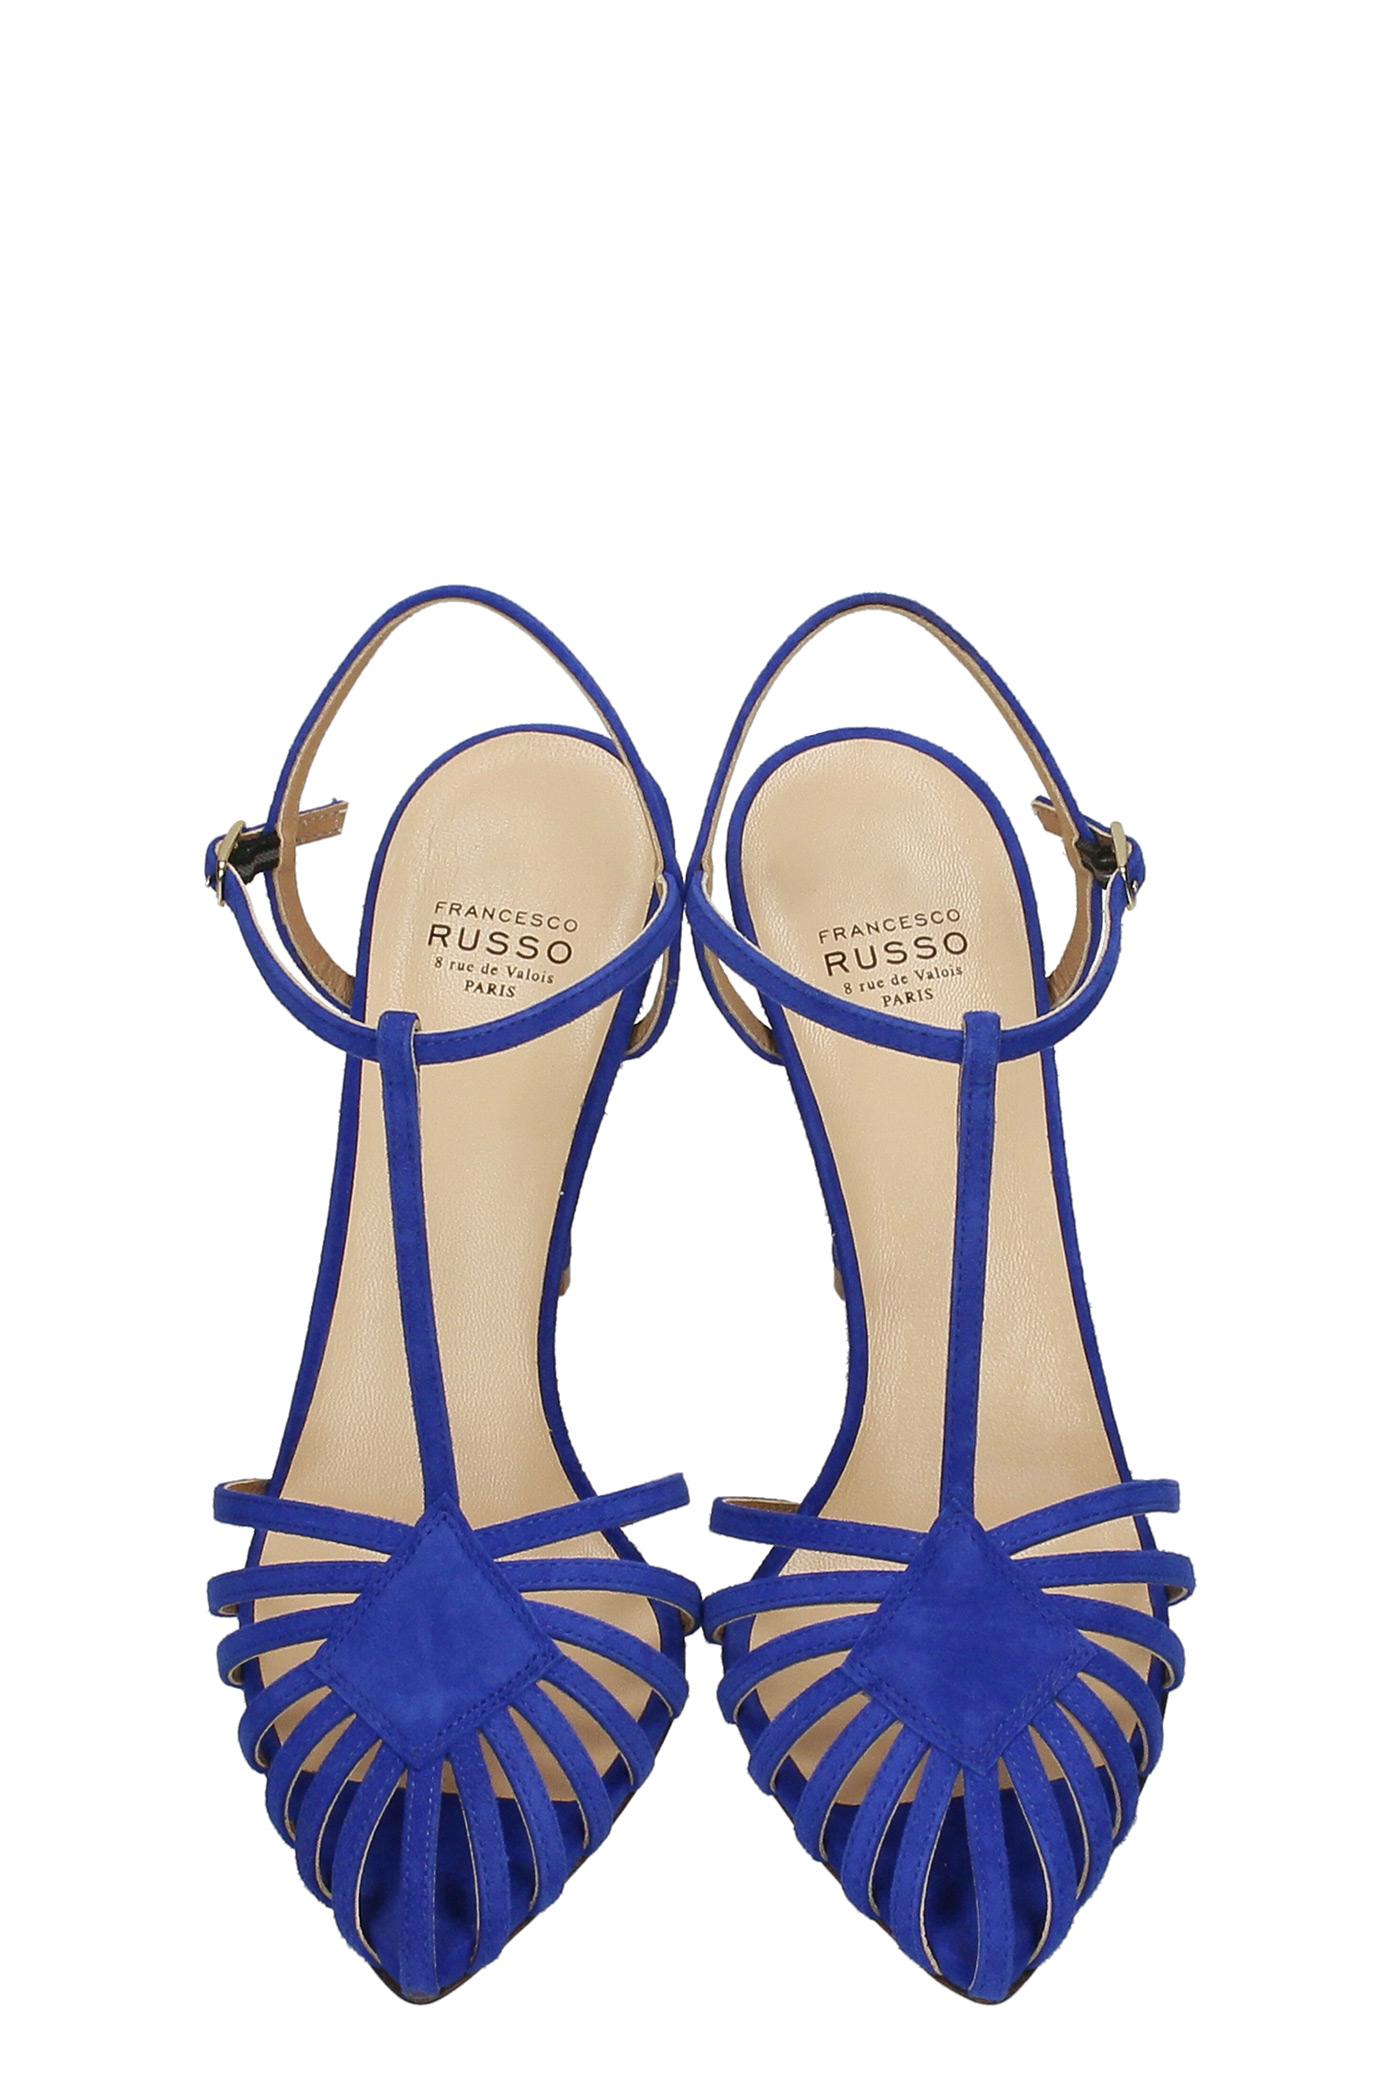 Francesco Russo Sandals In Blue Suede | Lyst